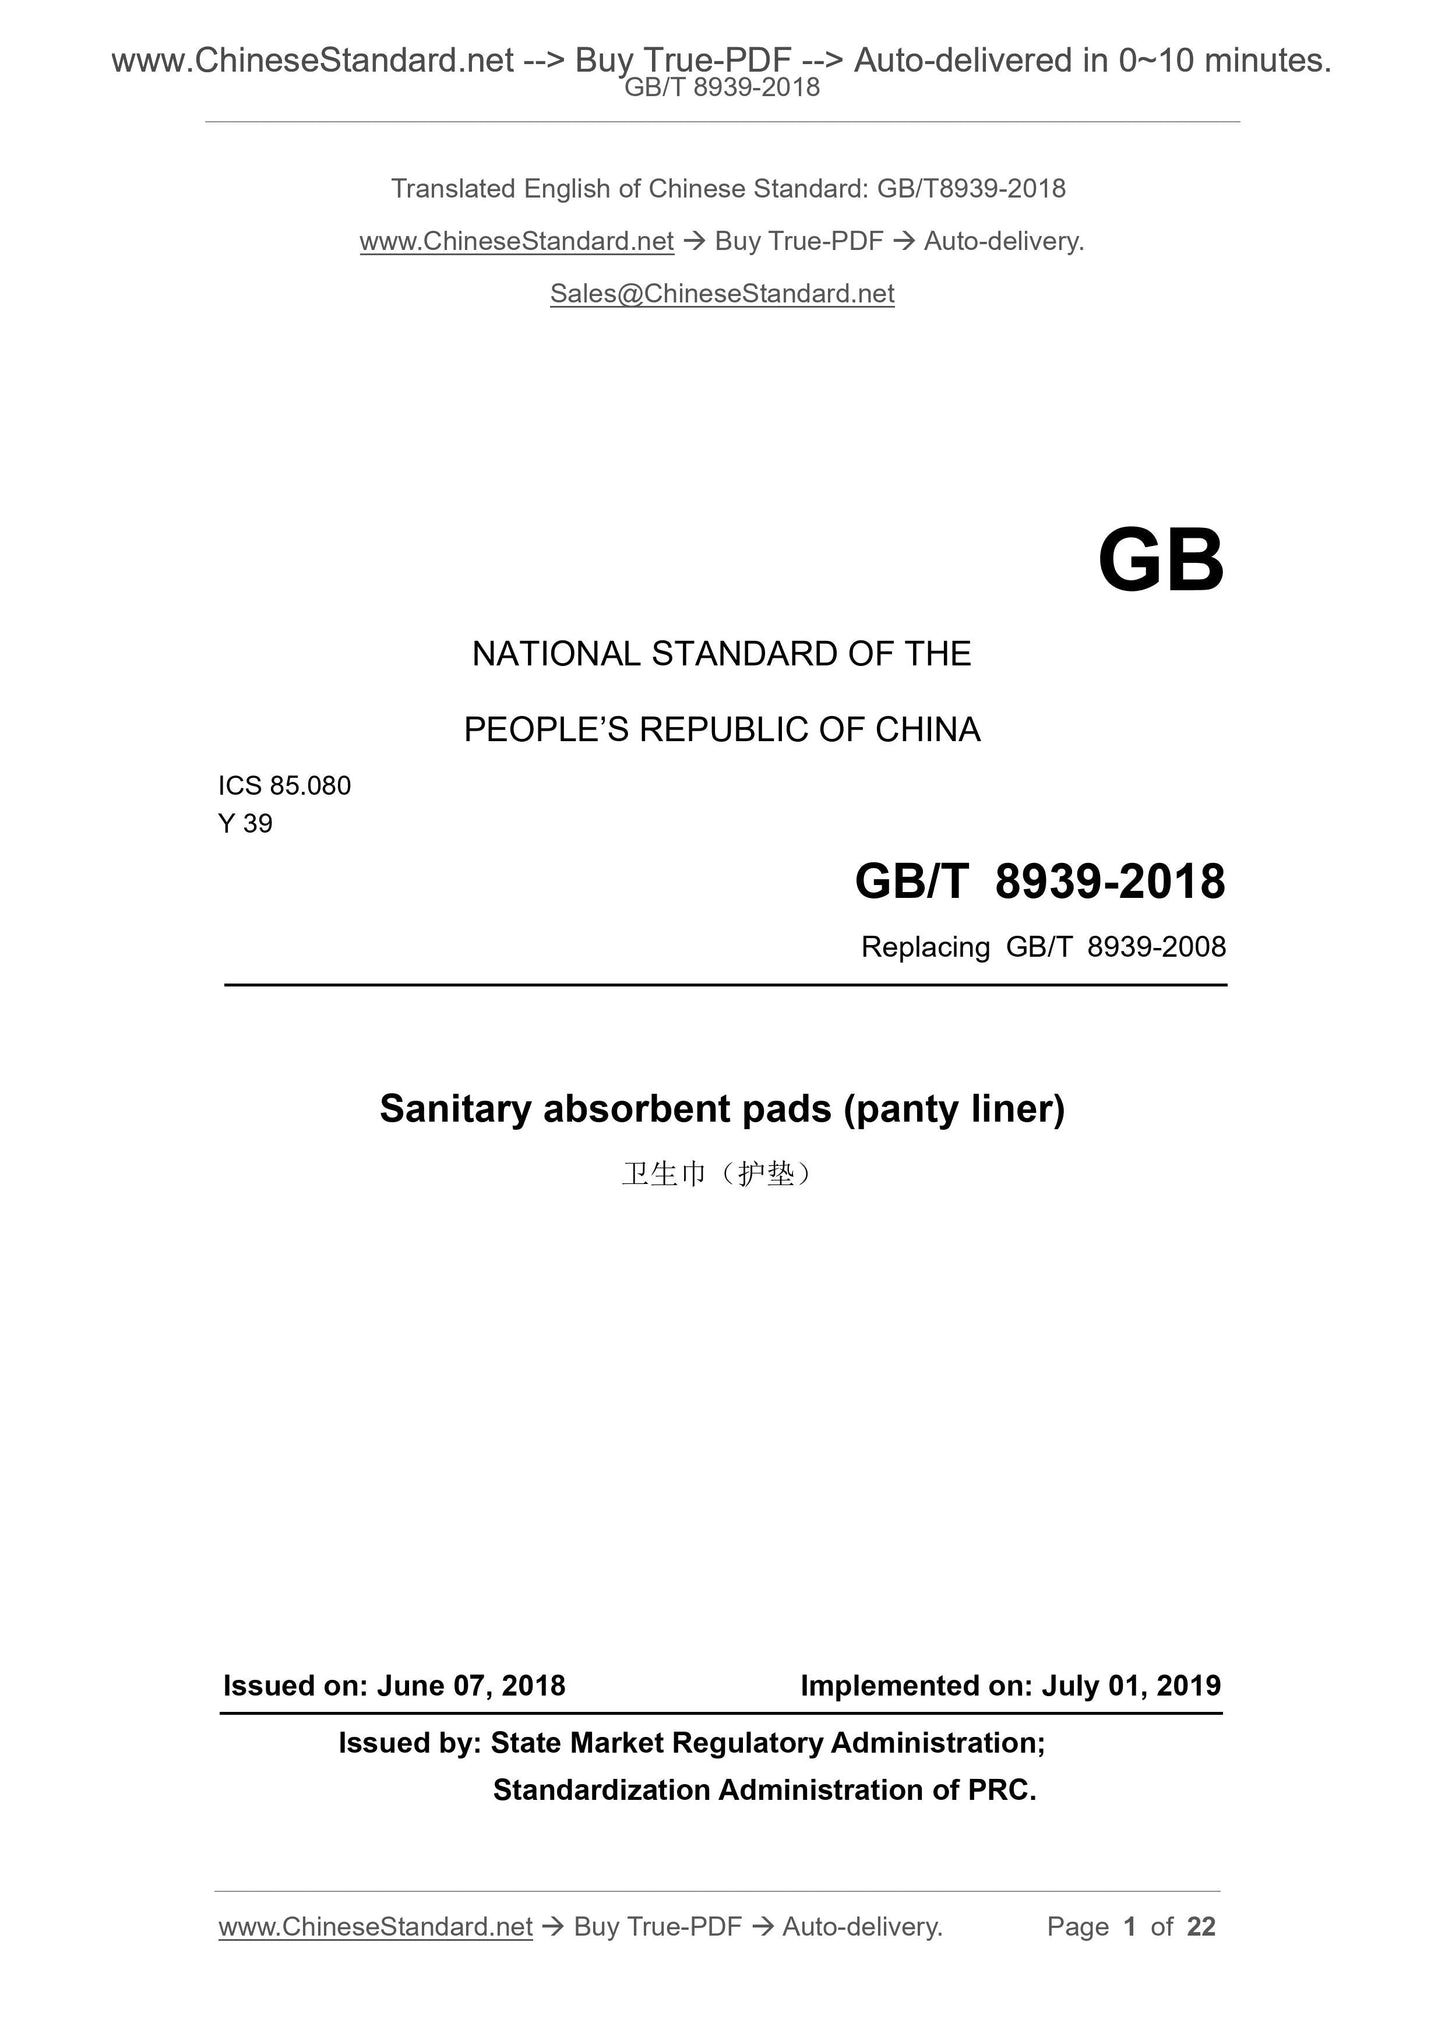 GB/T 8939-2018 Page 1